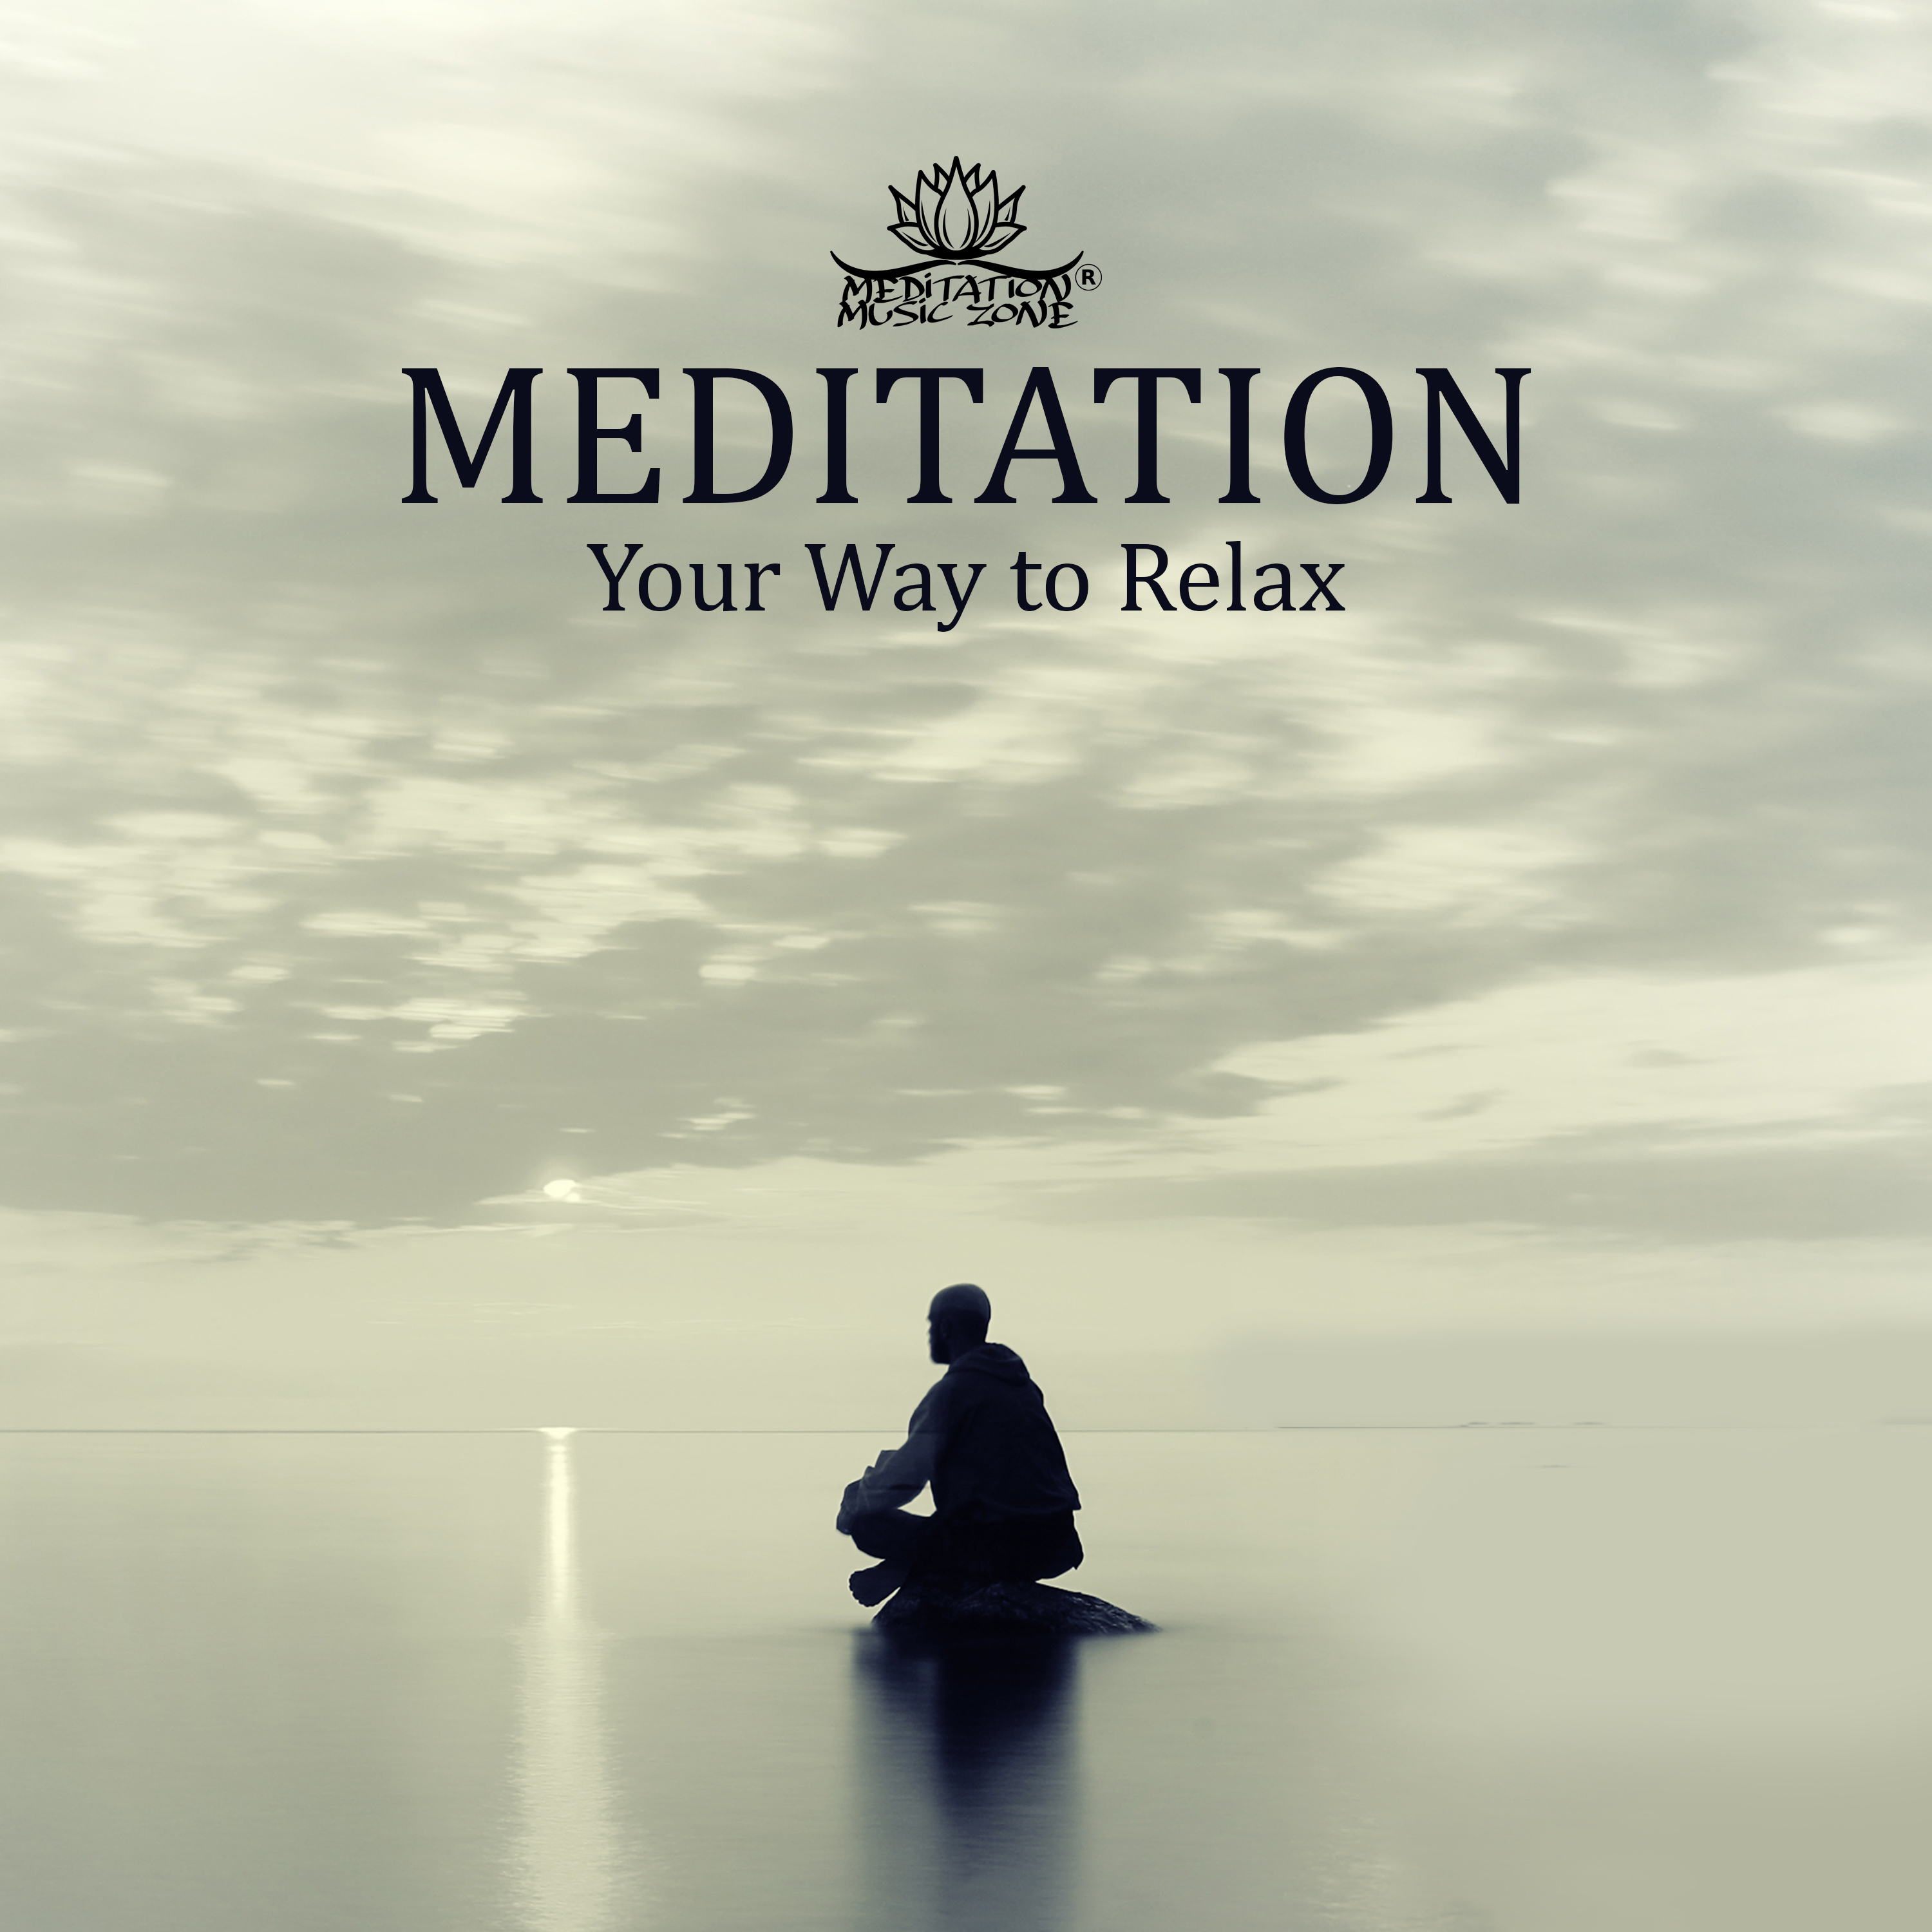 Meditation Your Way to Relax